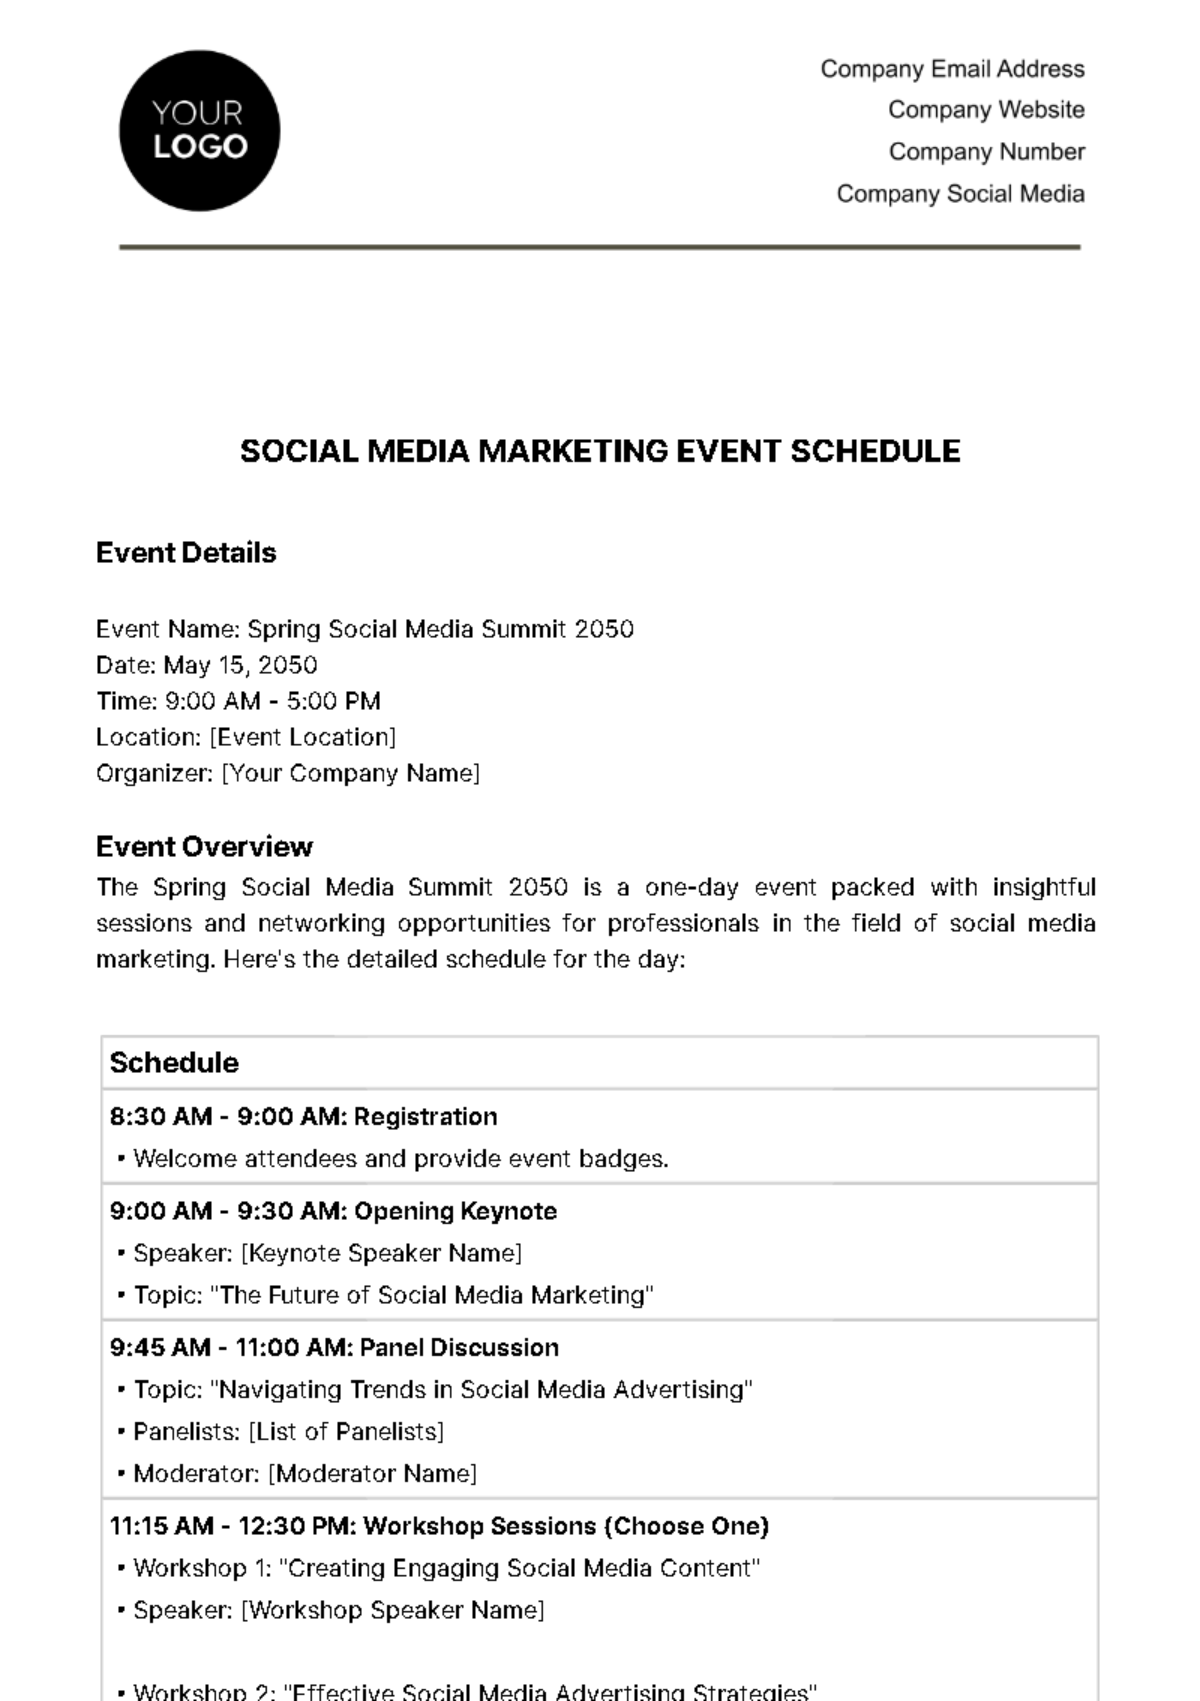 Free Social Media Marketing Event Schedule Template